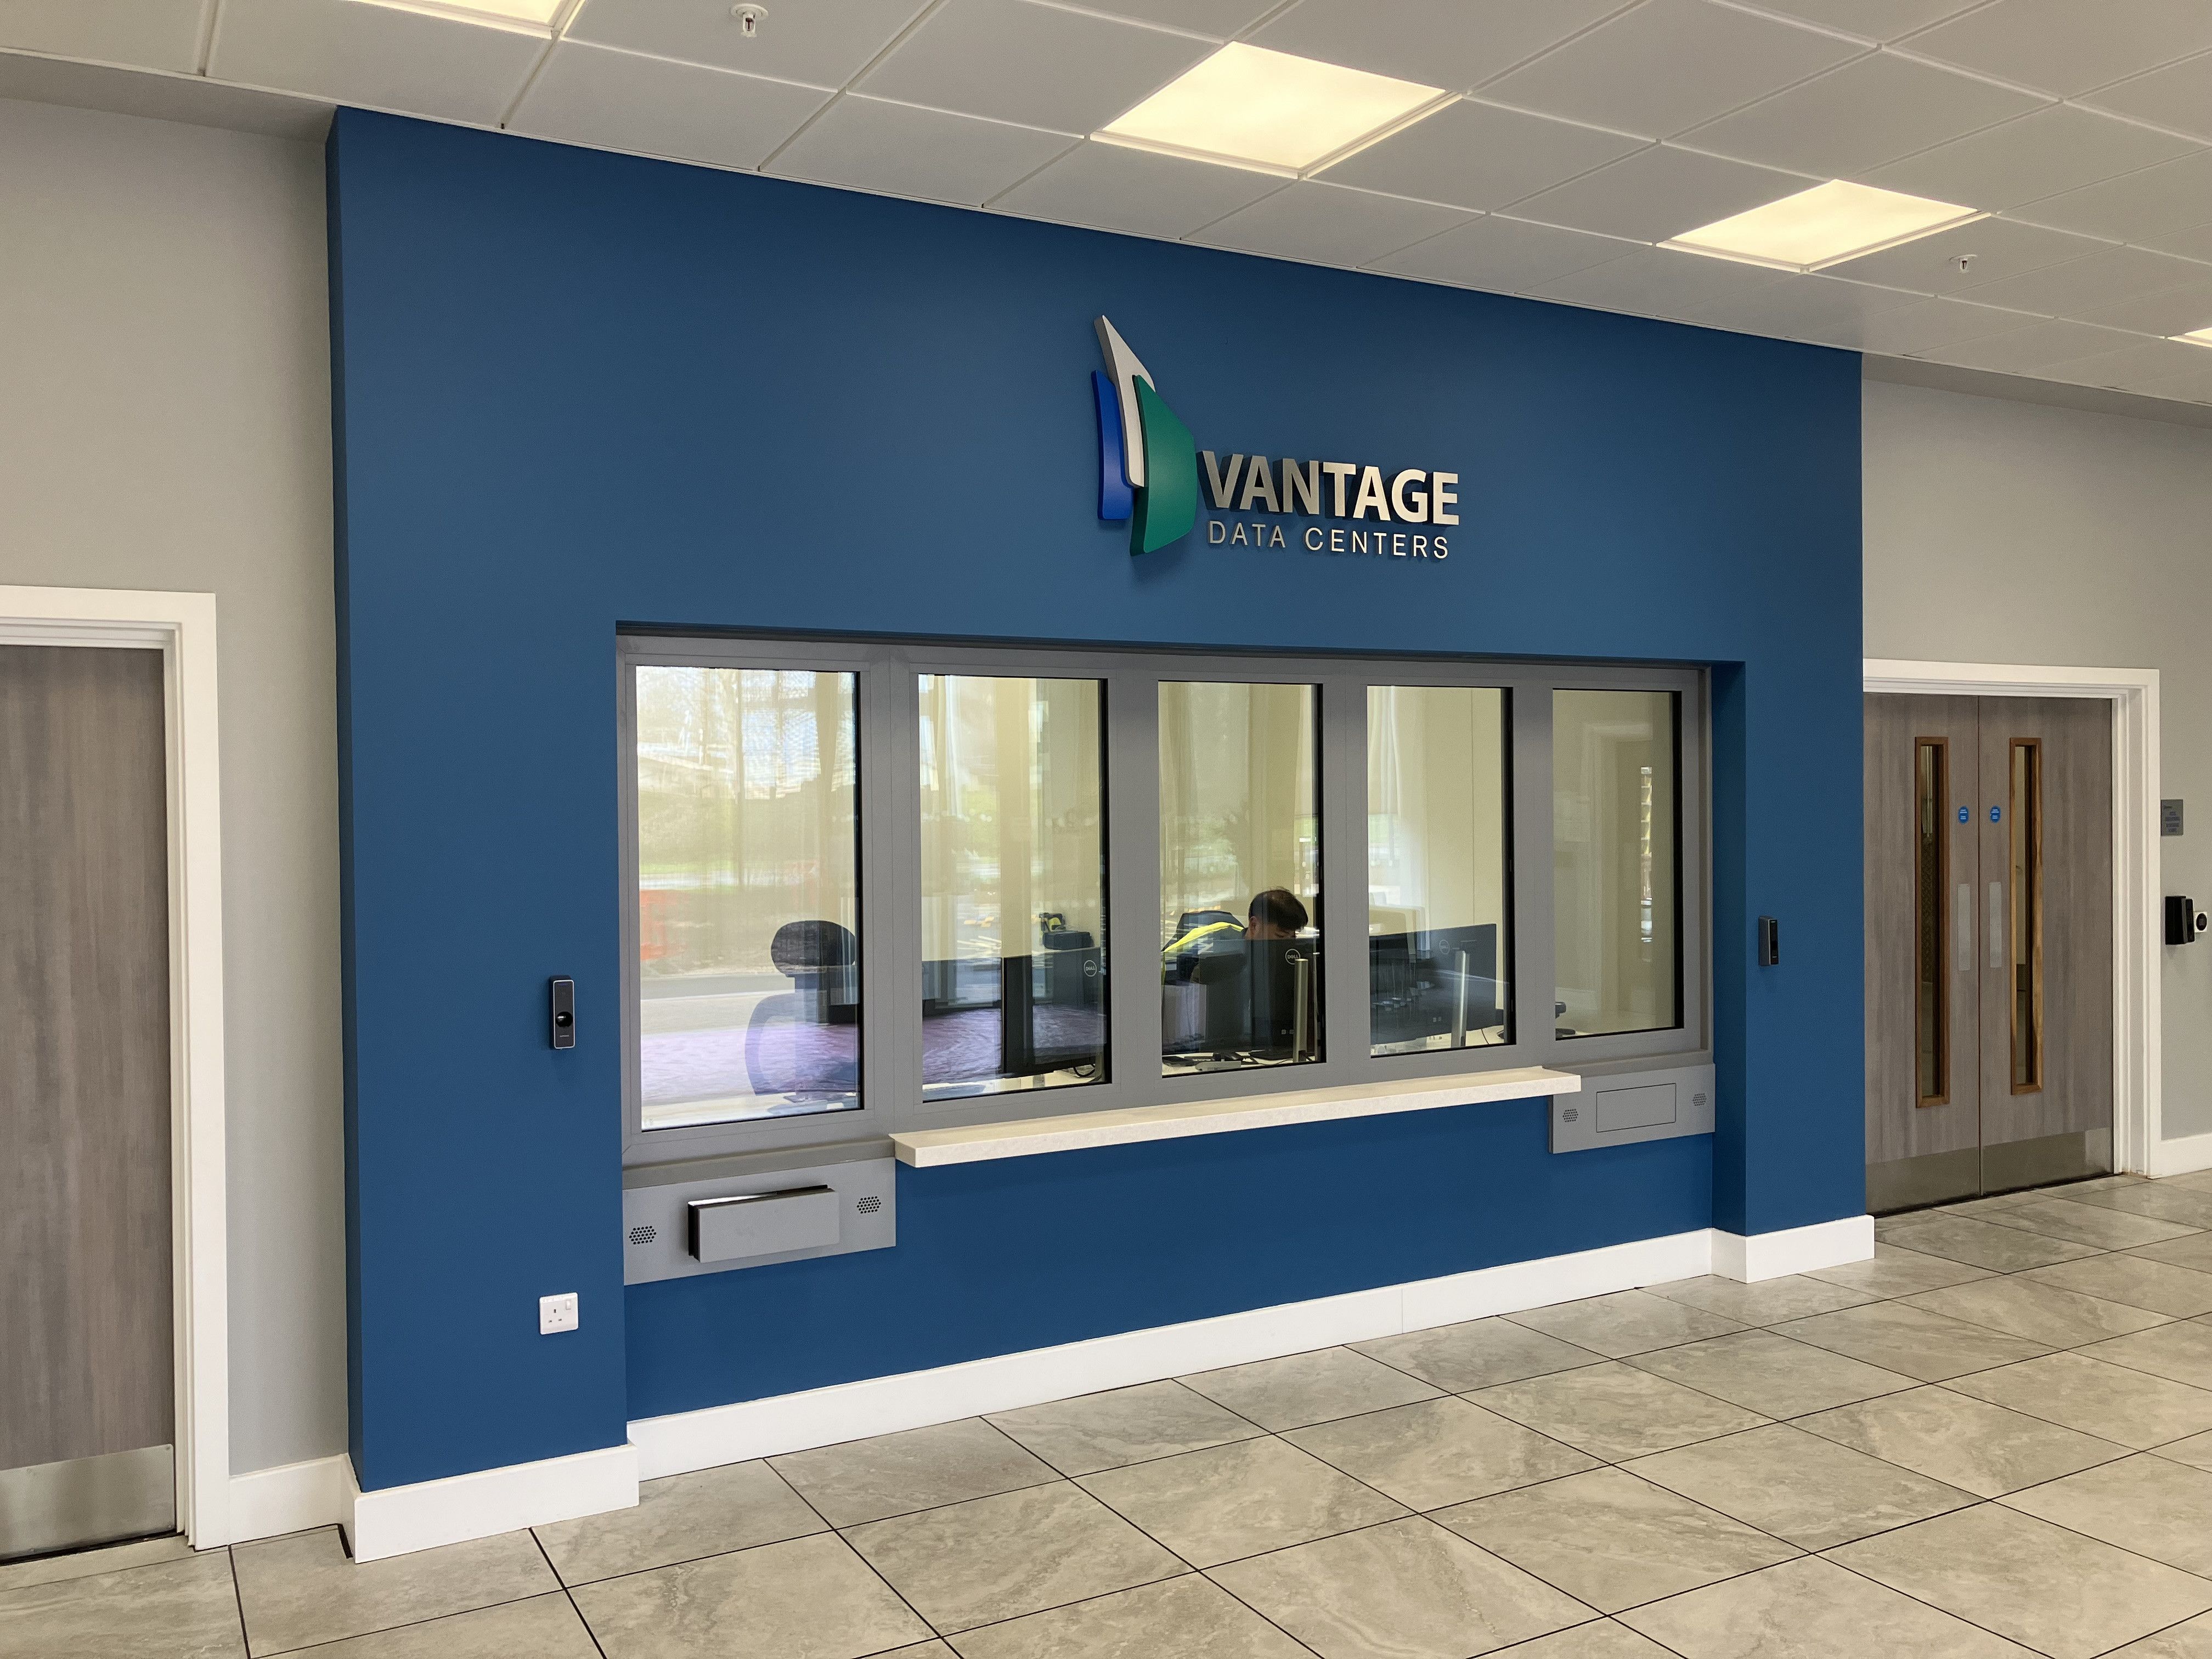 Vantage Data Centers internal signage and brand identity place making.